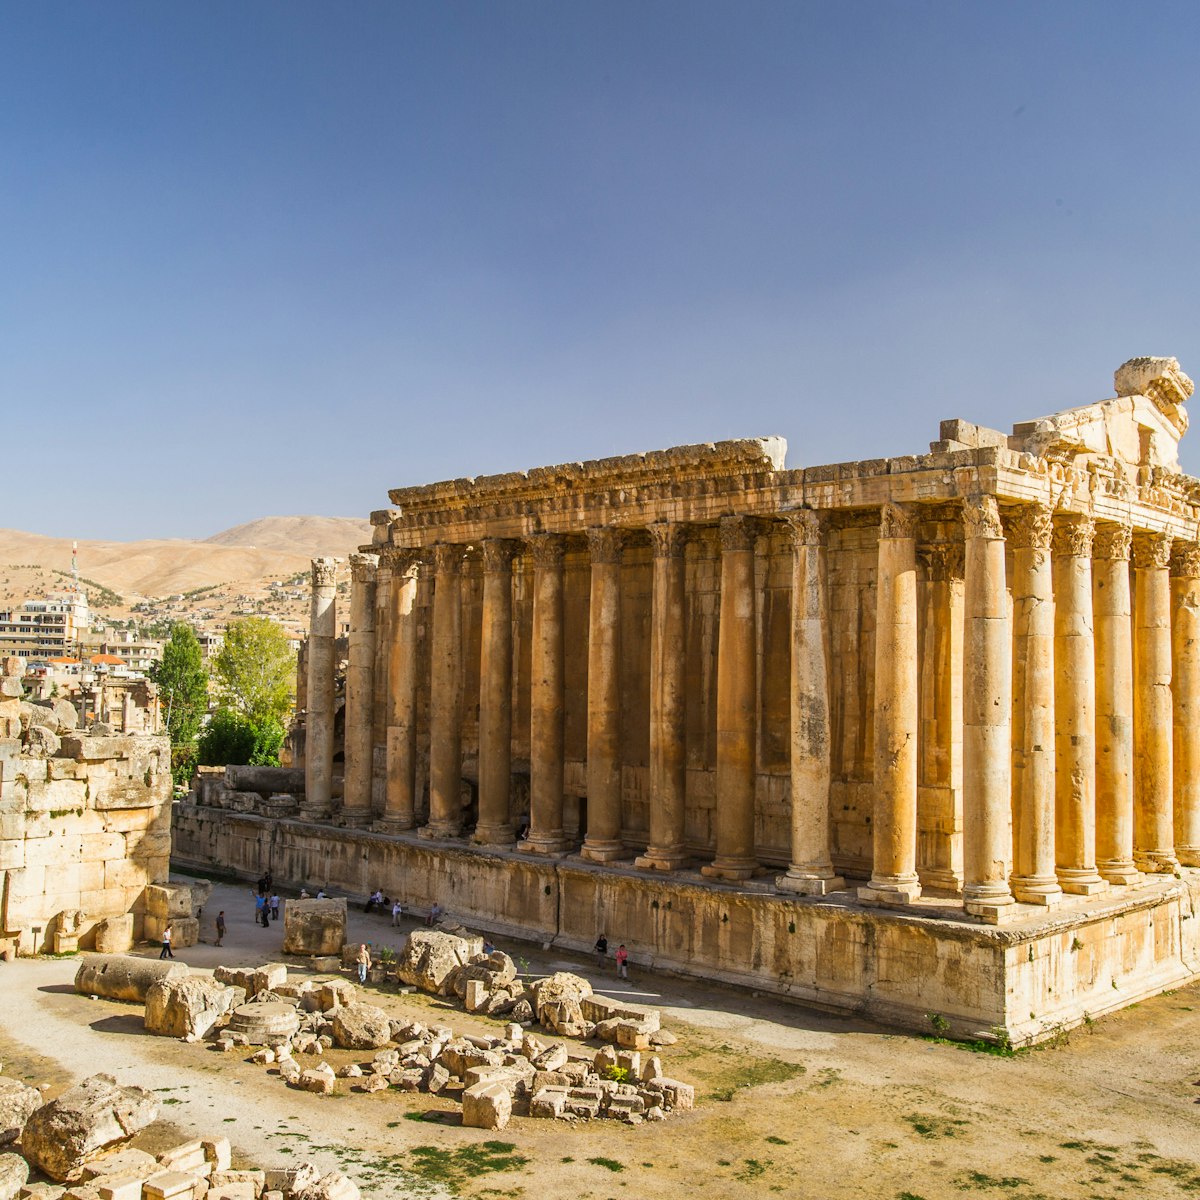 The Temple of Bacchus at Baalbek in Lebanon.
256443700
outdoor, empire, town, stone, jupiter, travel, rock, past, archeology, column, landmark, middle, valley, summer, east, old, roman, morning, sun, asia, building, lebanon, wall, world, unesco, famous, architecture, city, blue, temple, ruin, heliopolis, sky, lebanese, tourism, religion, mediterranean, ancient, arab, structure, landscape, baalbeck, baalbek, bekaa